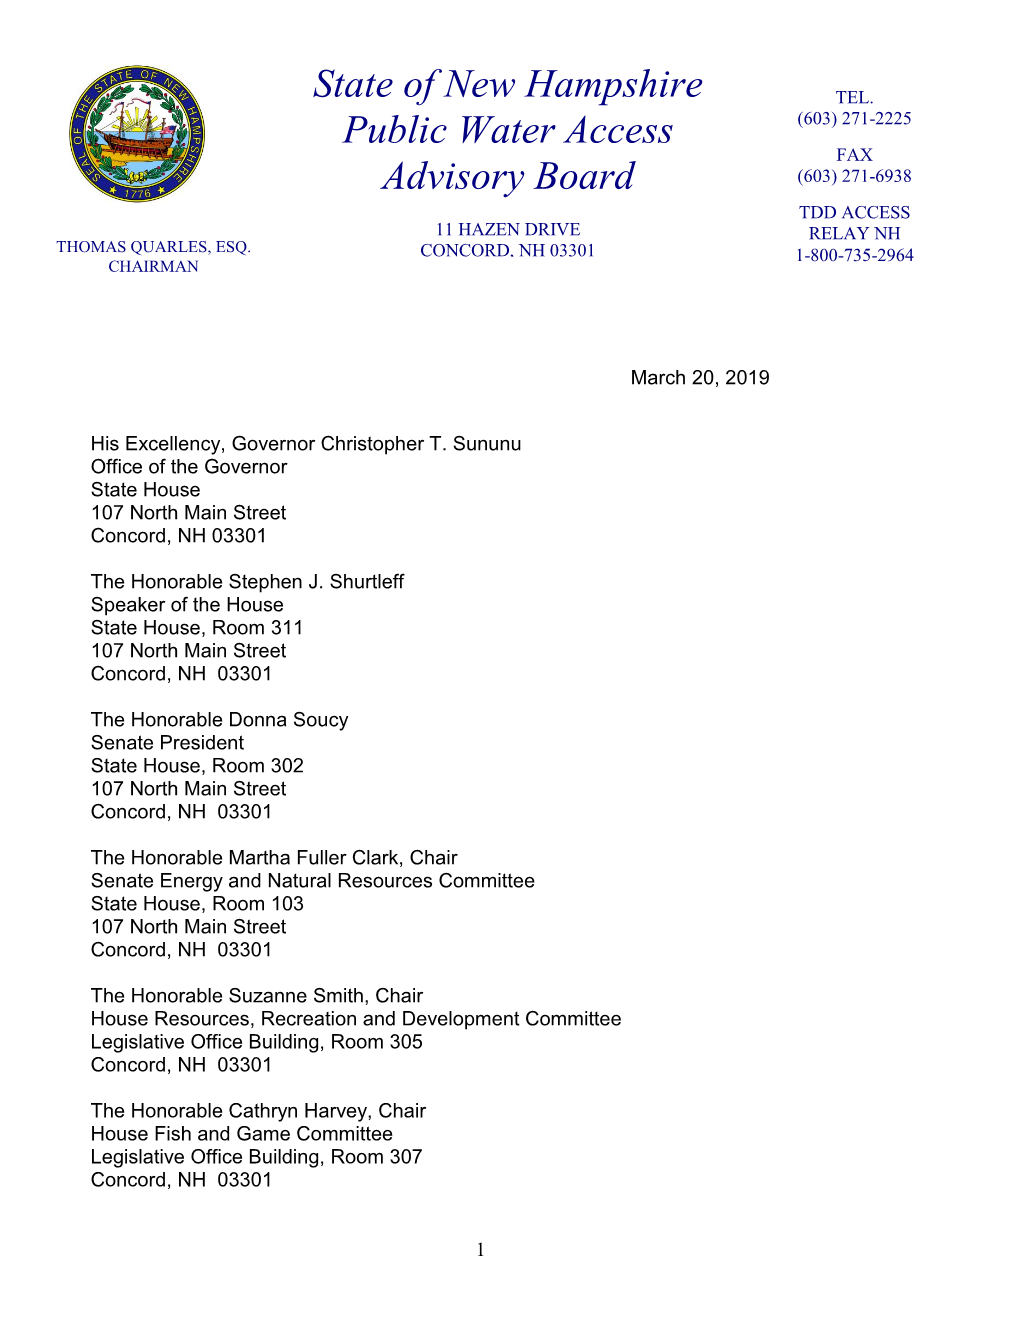 State of New Hampshire Public Water Access Advisory Board